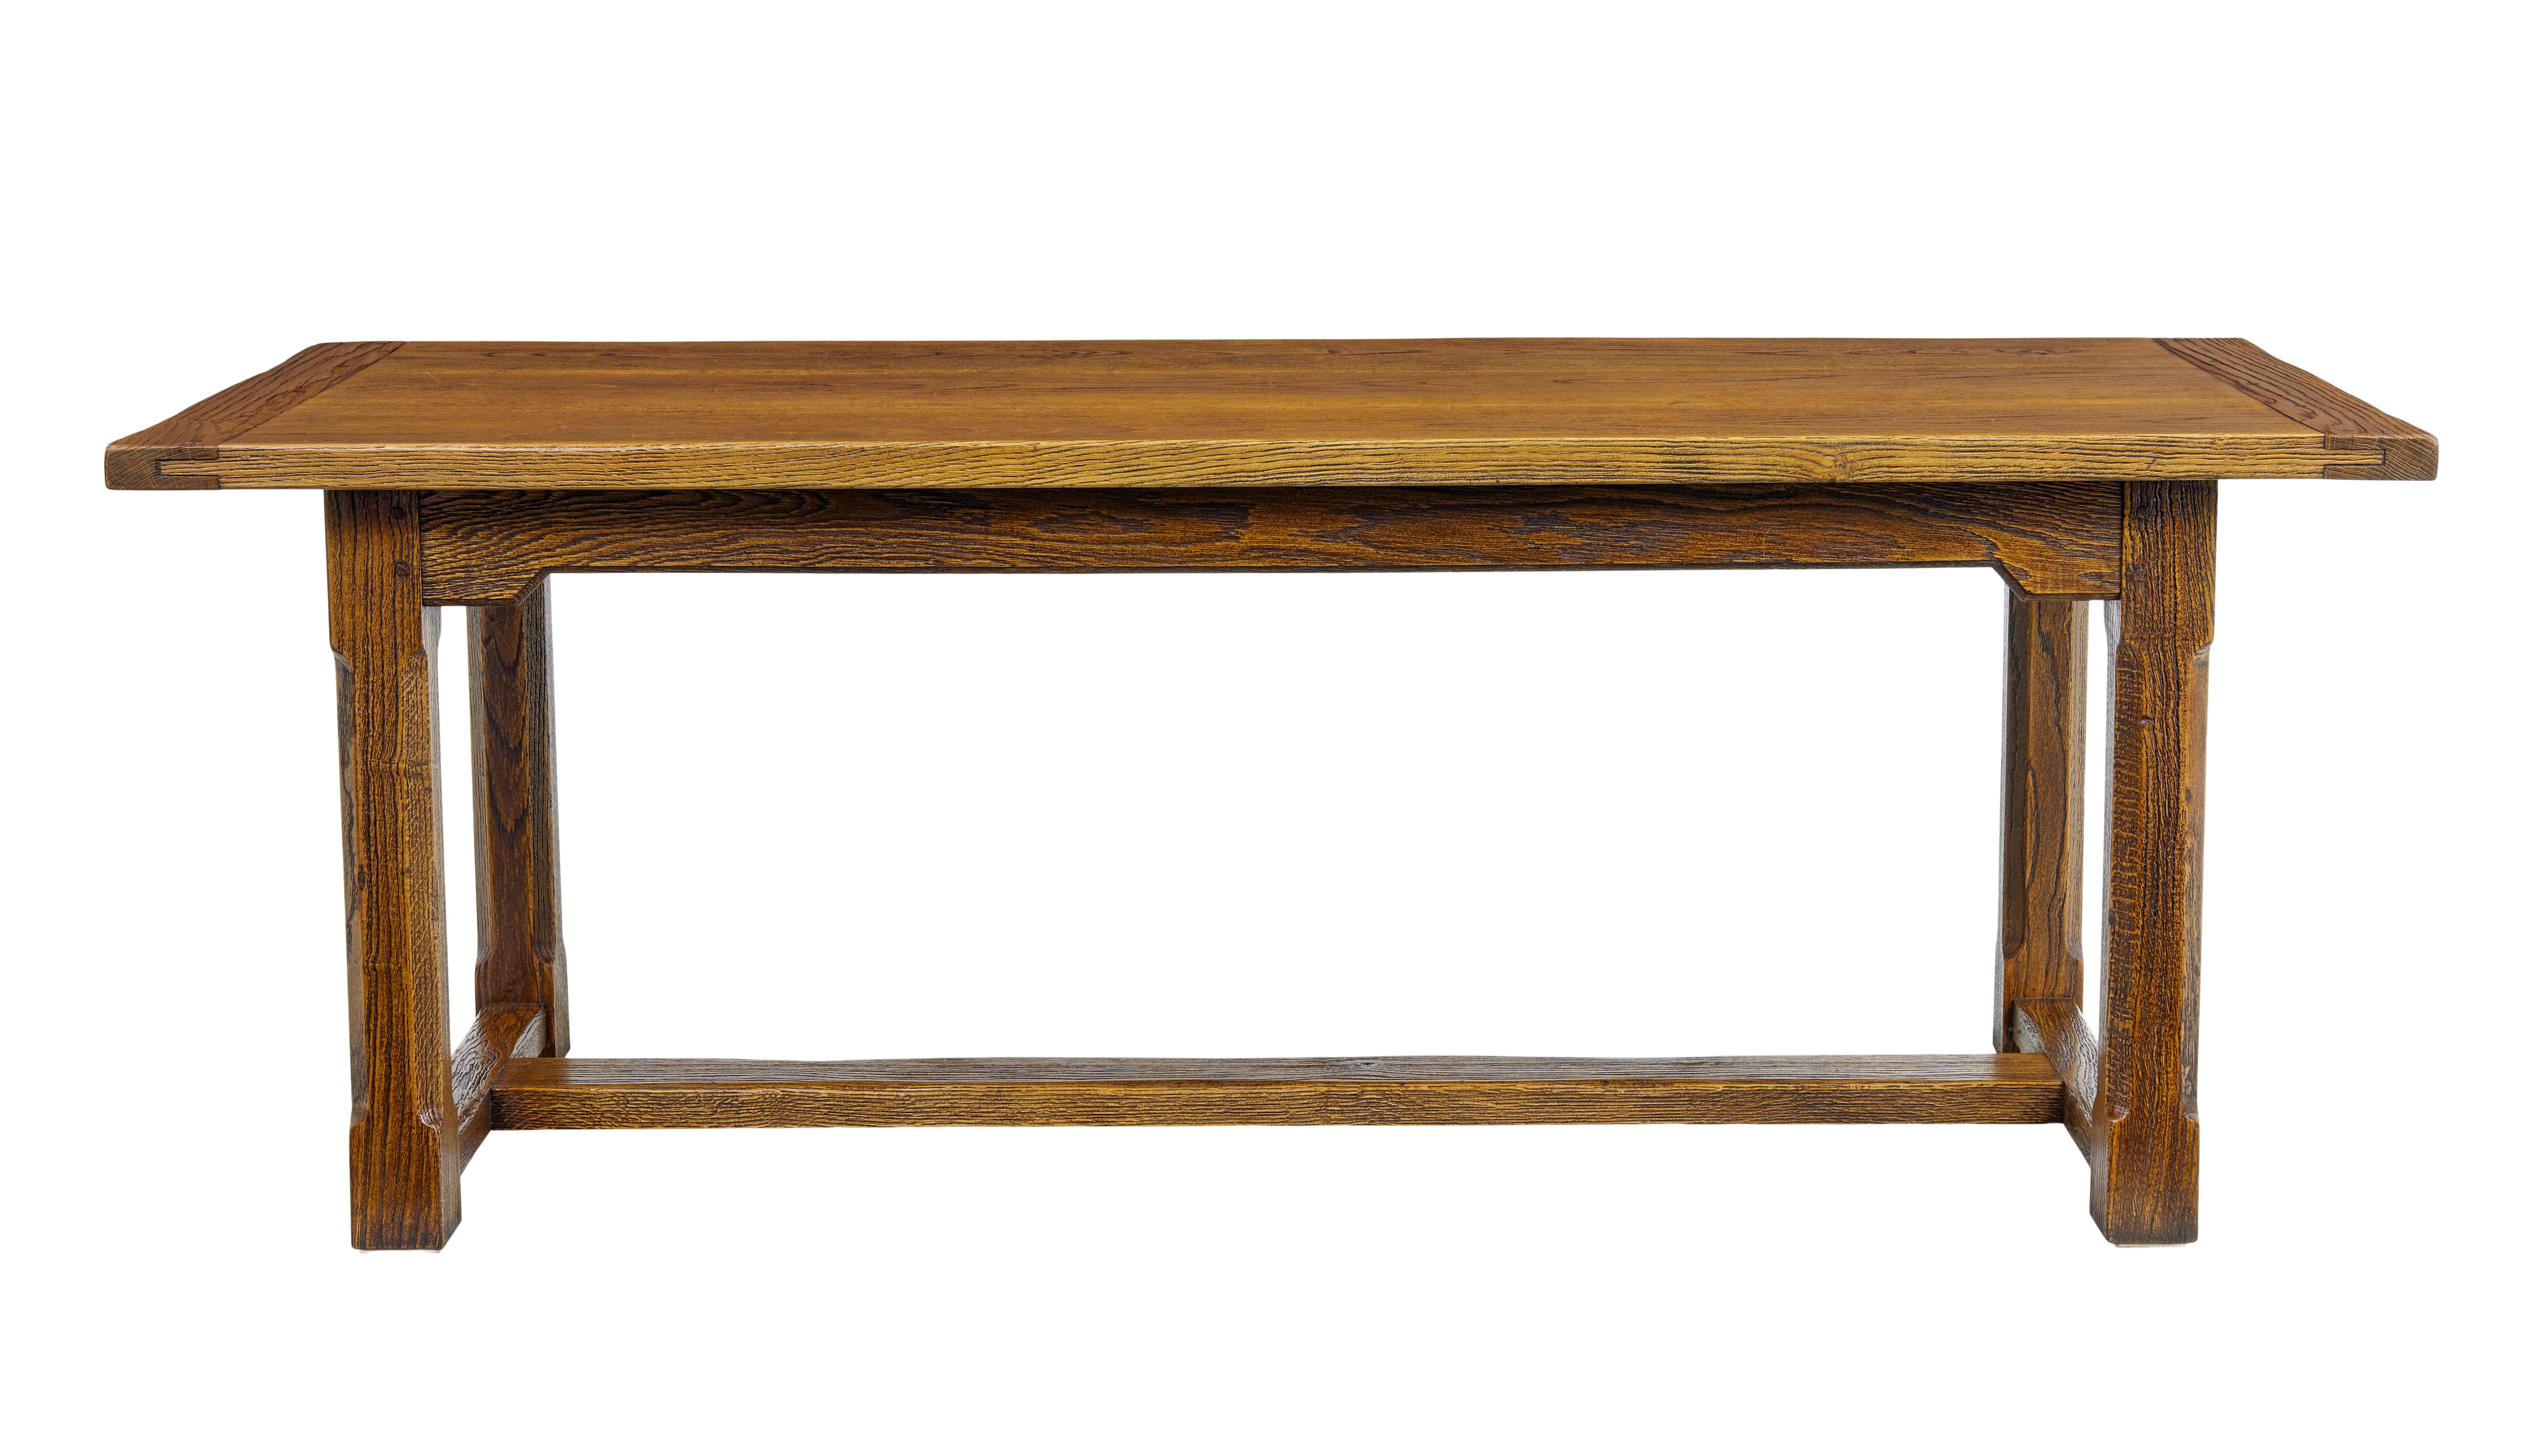 English made golden oak refectory dining table circa 1990.

Made from solid oak and presented with an open grain to the surfaces, sealed in with polish to showcase the rich golden colour.  Seats a comfortable 6-8.  3 plank top with cleated ends. 